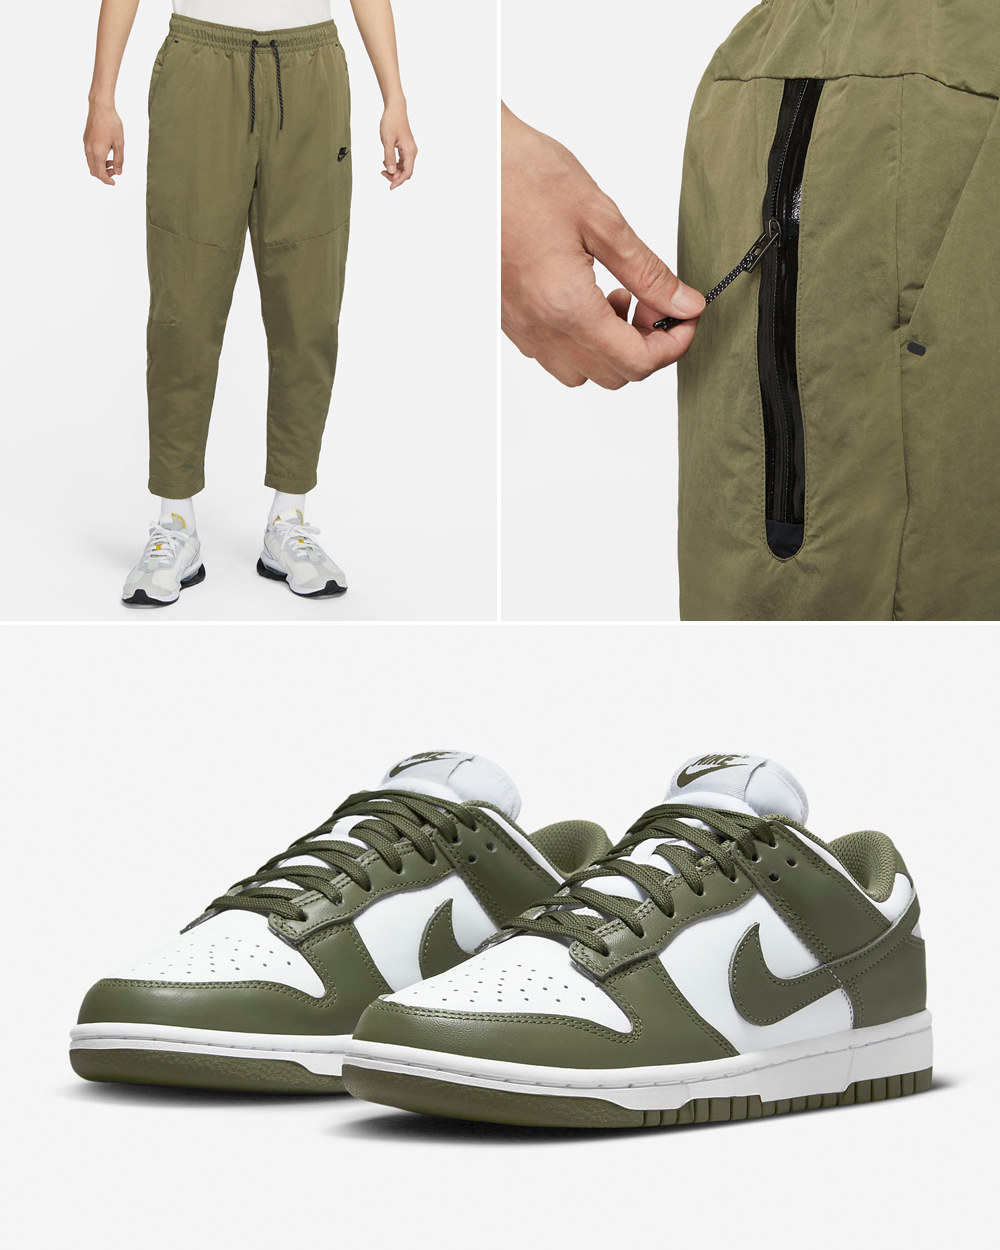 Nike Dunk Low Medium Olive Outfits 4